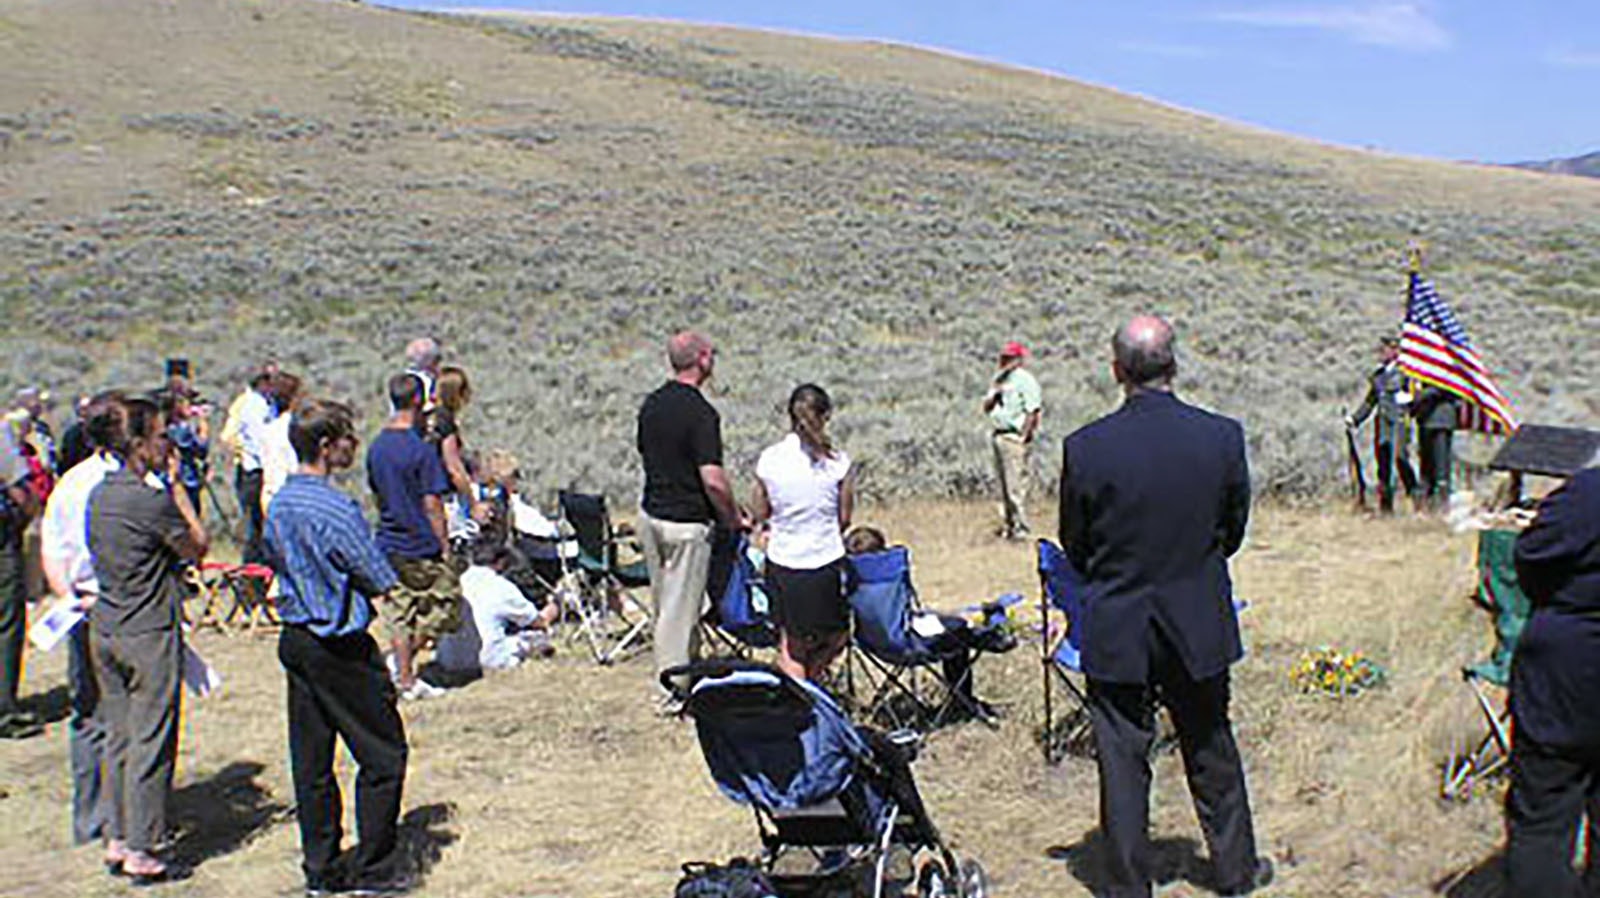 A memorial service in 2006 on the 10th anniversary of the crash.